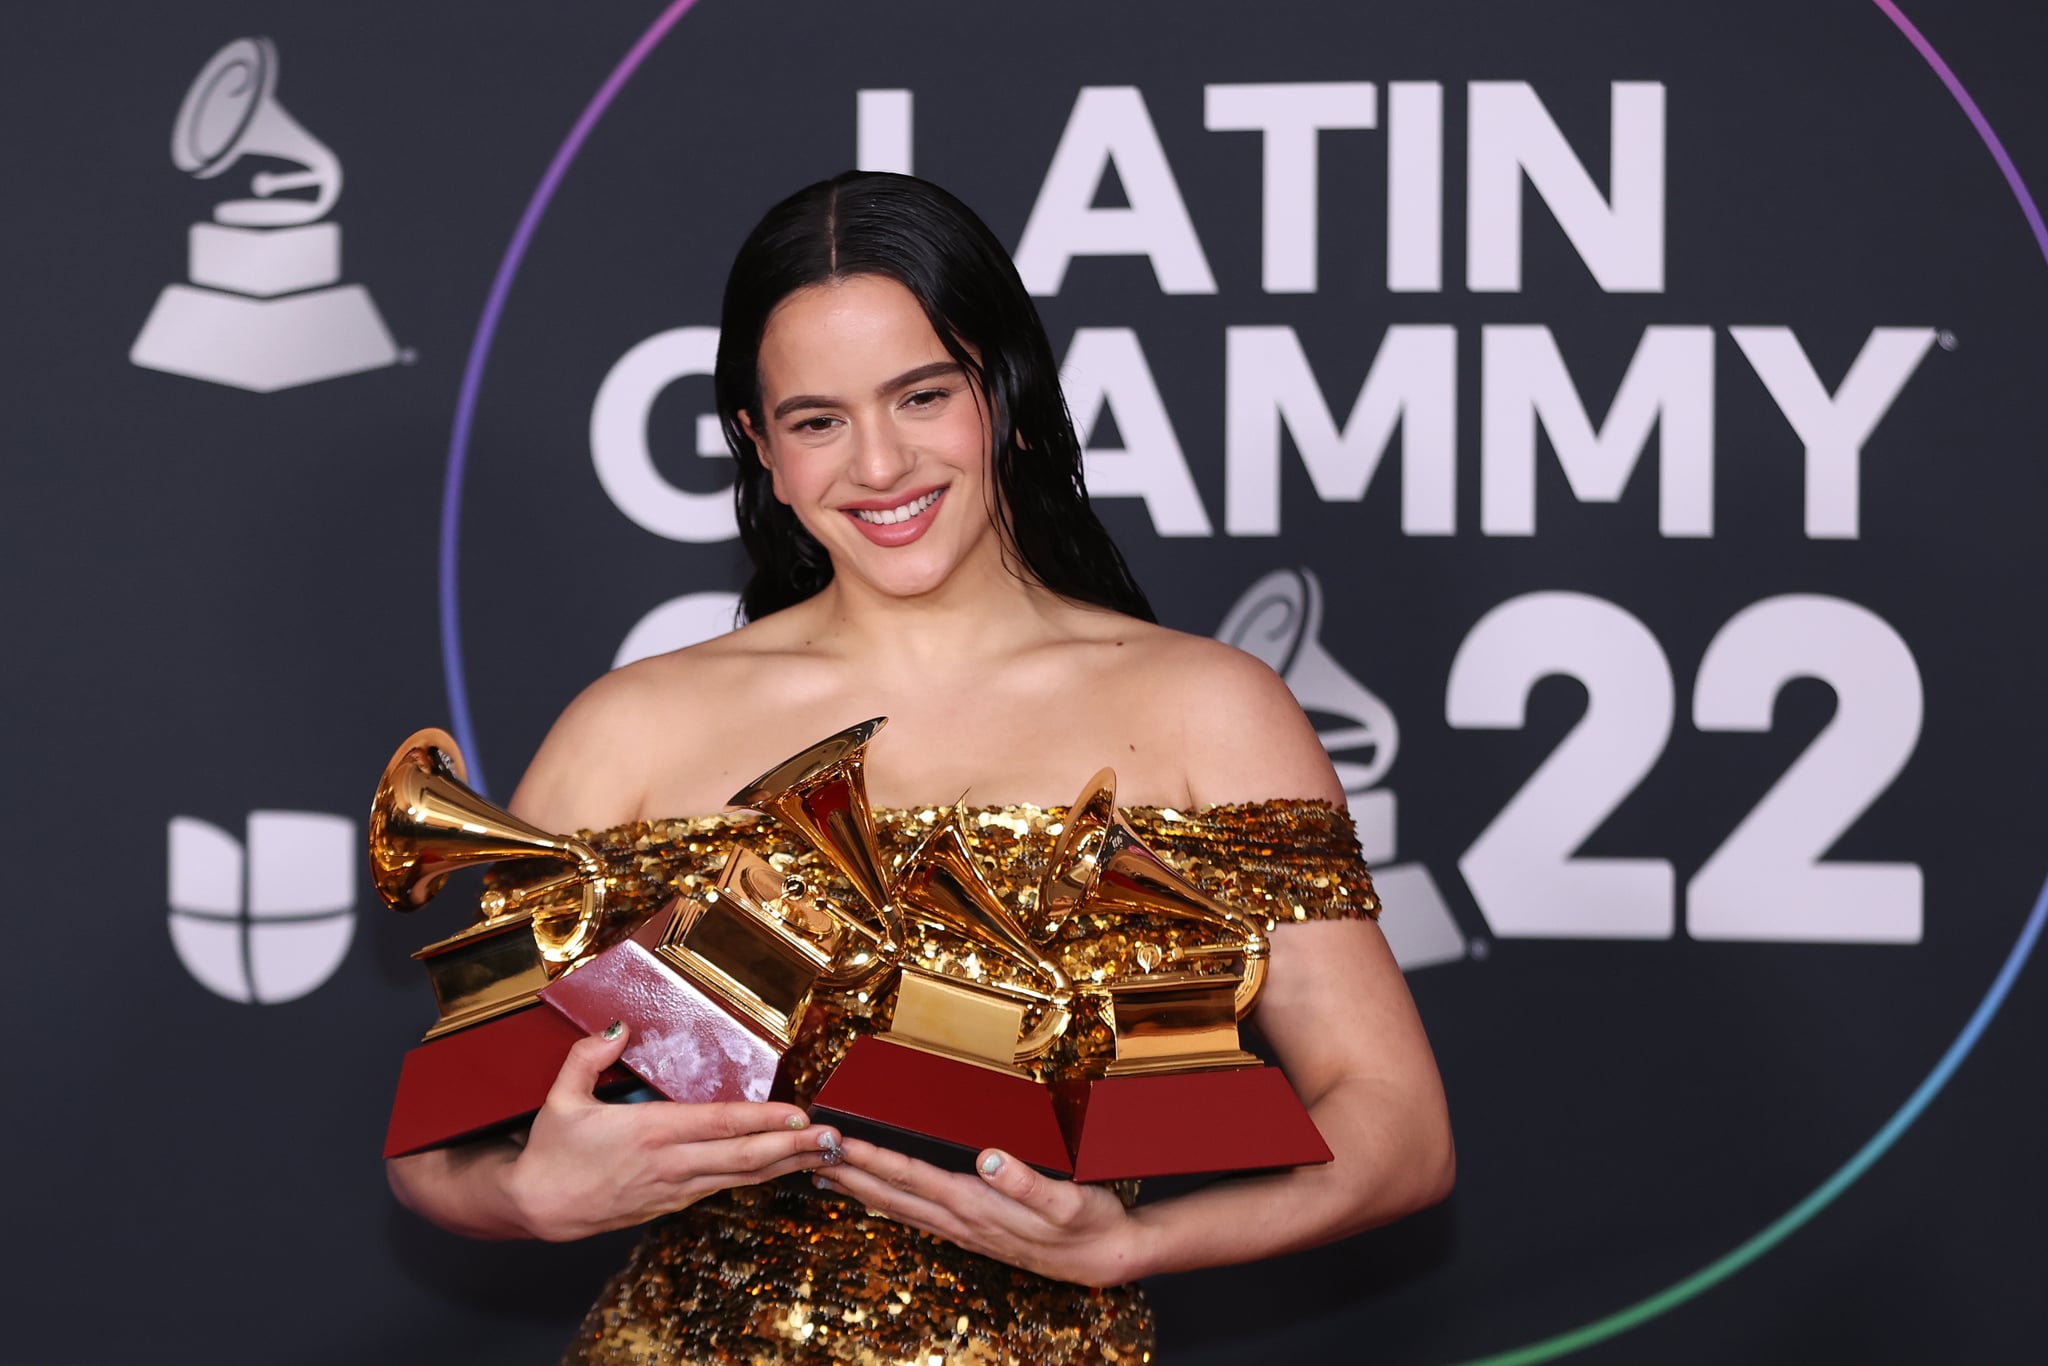 LAS VEGAS, NV - NOVEMBER 17: Rosalía poses with the awards for Best Recording Package, Album of the Year, and Best Alternative Music Album in the media center for The 23rd Annual Latin Grammy Awards at the Mandalay Bay Events Center on November 17, 2022 in Las Vegas, Nevada. (Photo by Omar Vega/FilmMagic)